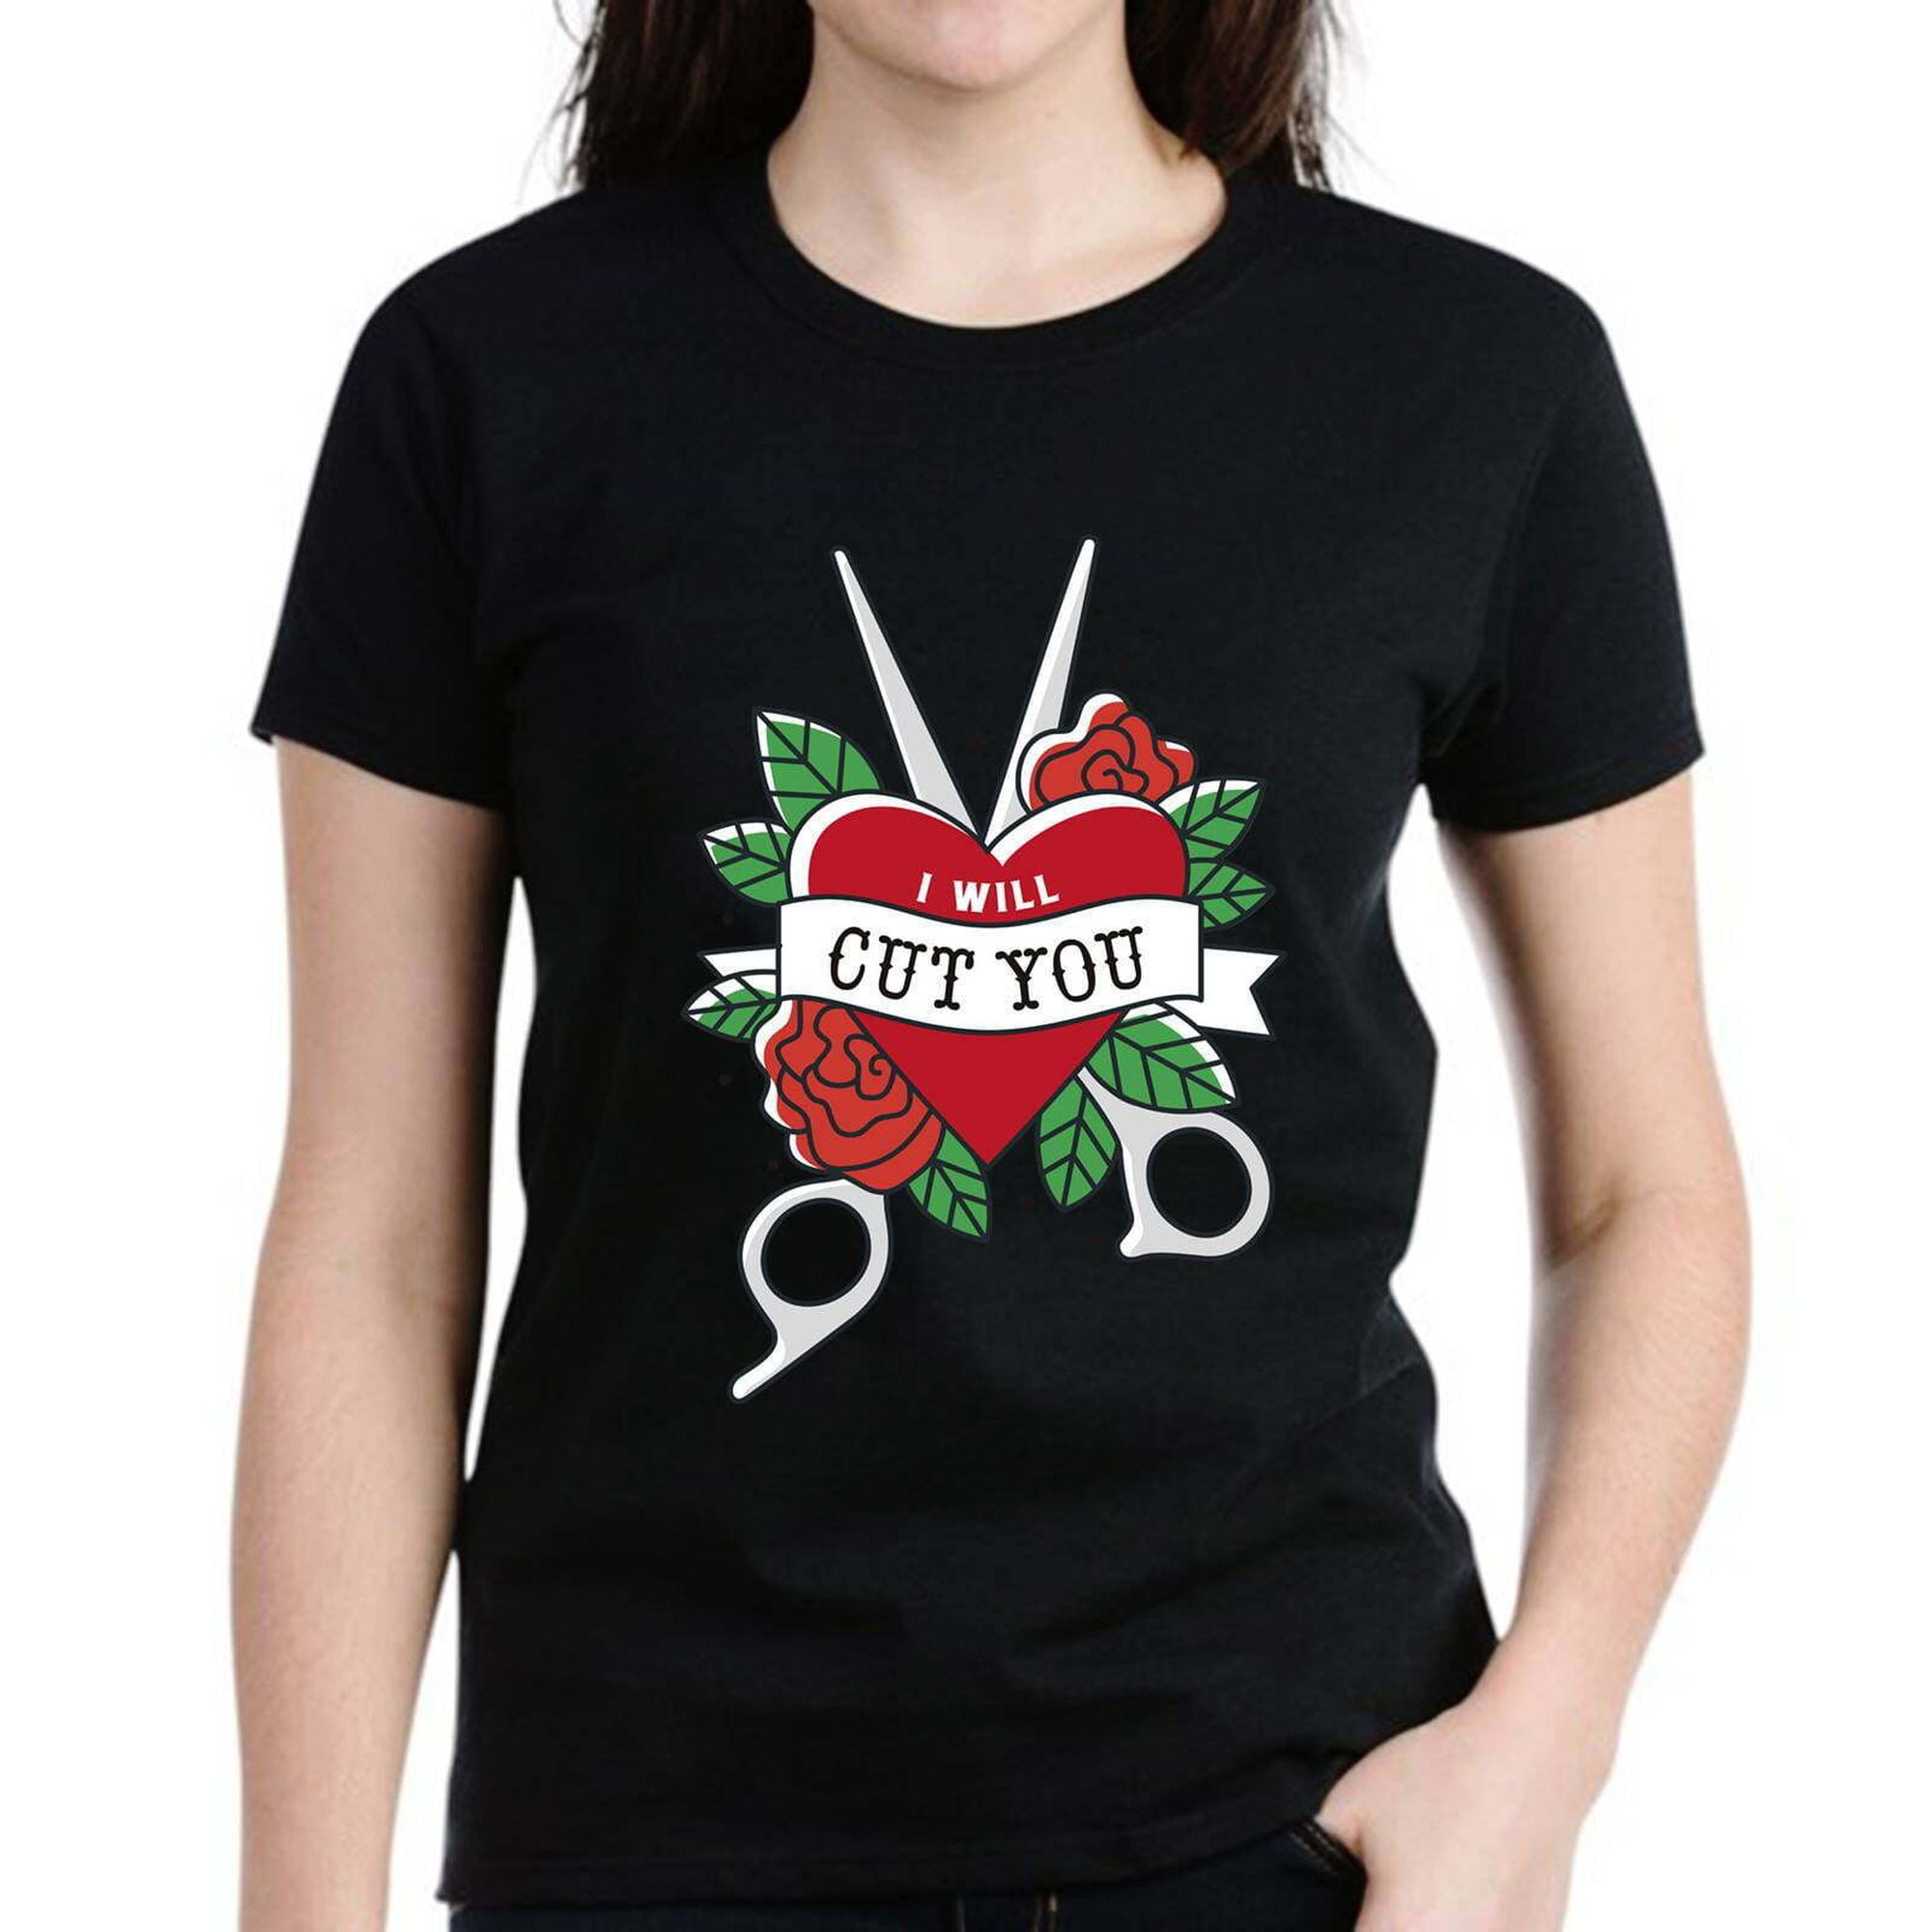 Fashionable Women's T-Shirt: Edgy Hairstyle Tee for Ultimate Comfort ...